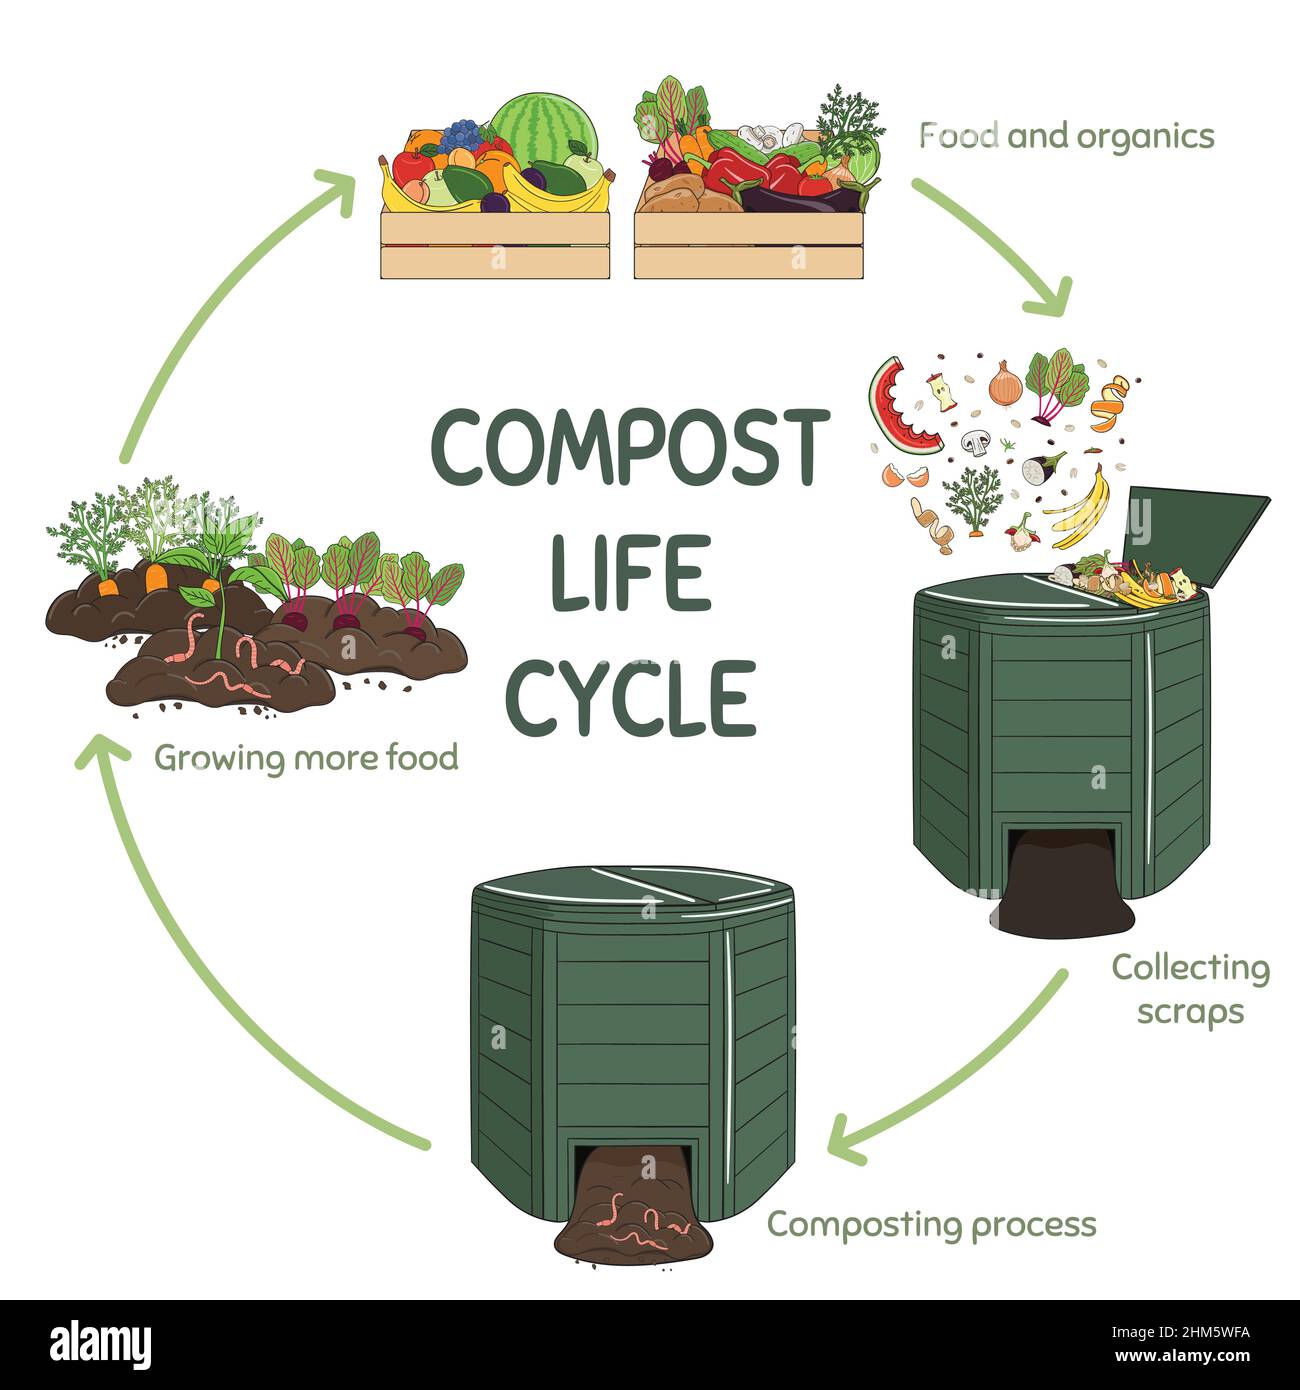 Compost life circle infographic. Composting process. Schema of recycling organic waste from collecting kitchen scraps to use compost for farming. Stock Vector